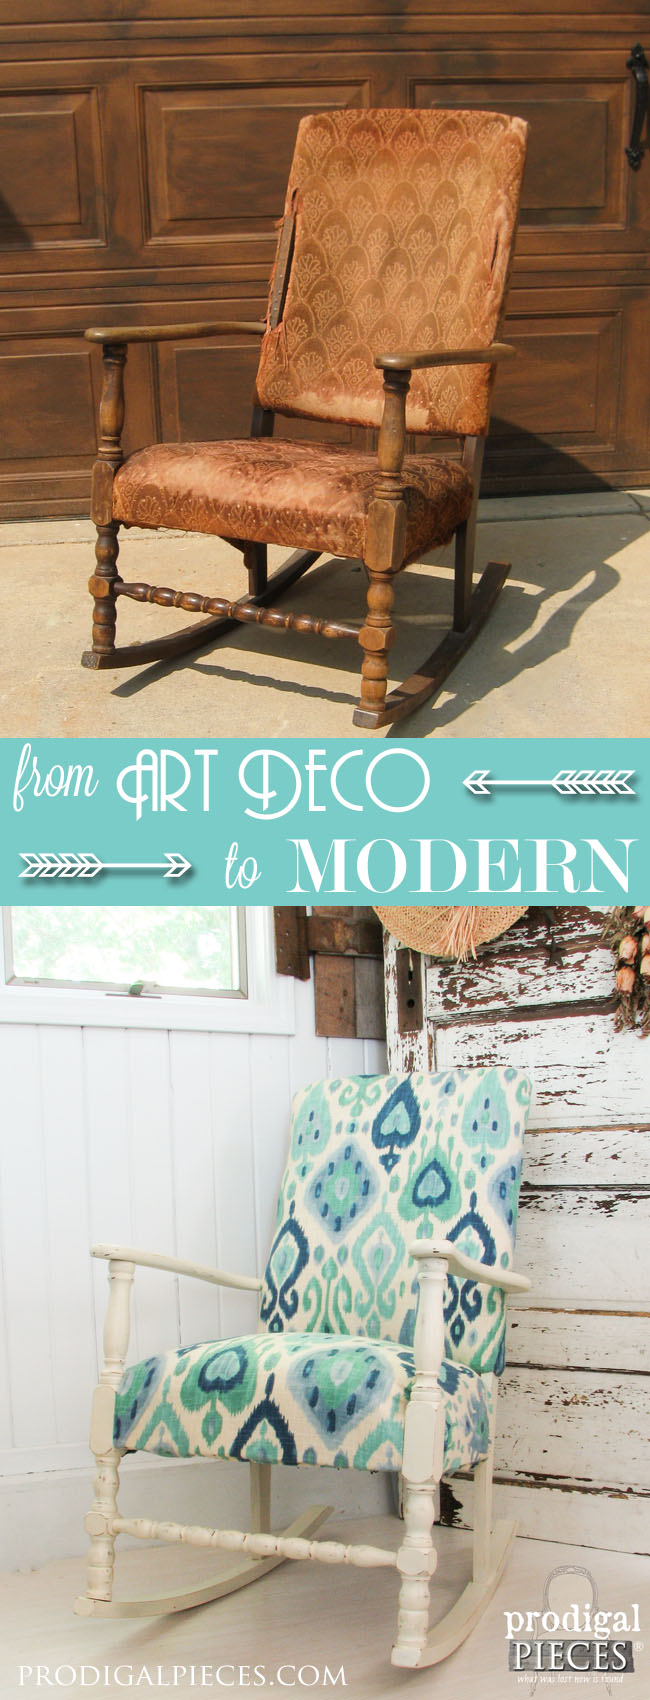 Worn out Art Deco Rocking Chair Gets a Modern Ikat Facelift by Prodigal Pieces | www.prodigalpieces.com